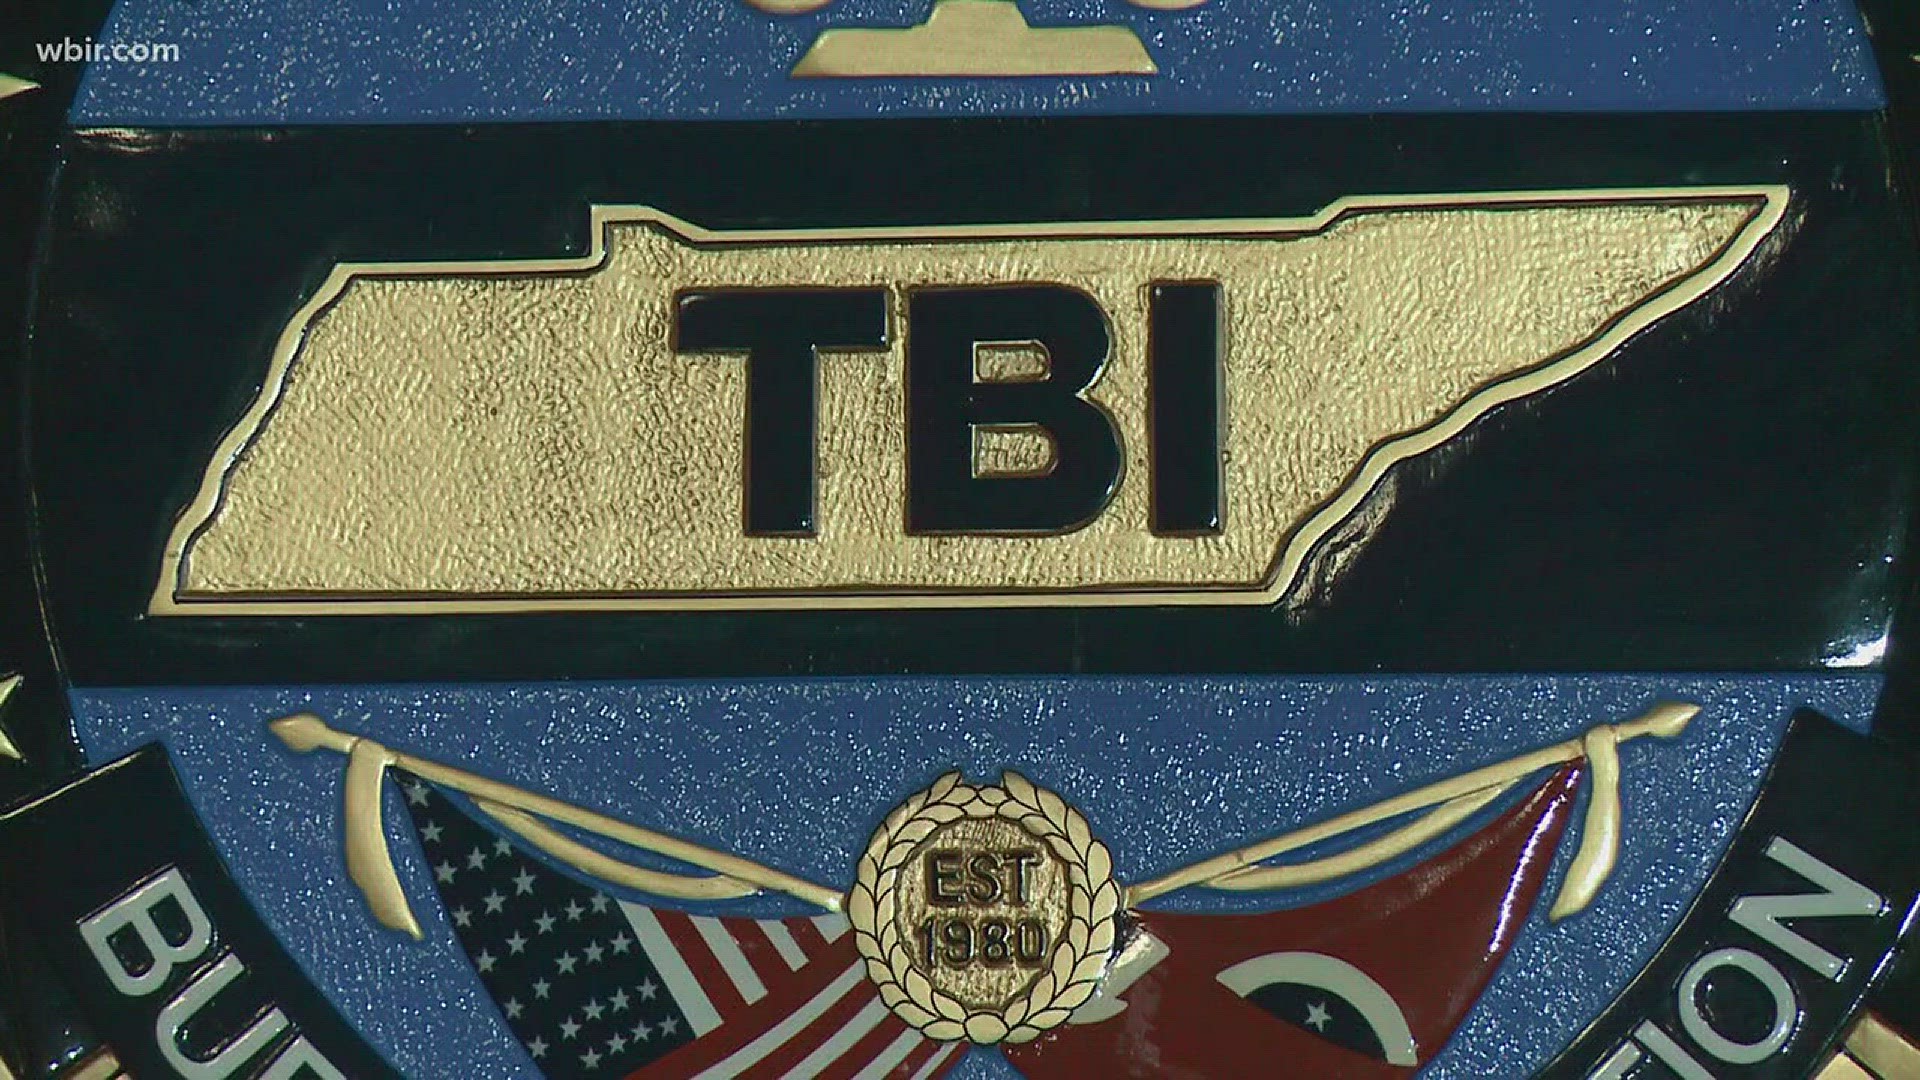 Oct. 26, 2017: Tackling human trafficking is a priority for Tennessee. In fact, the TBI says it is one of the leading states in the country in the fight against human trafficking.